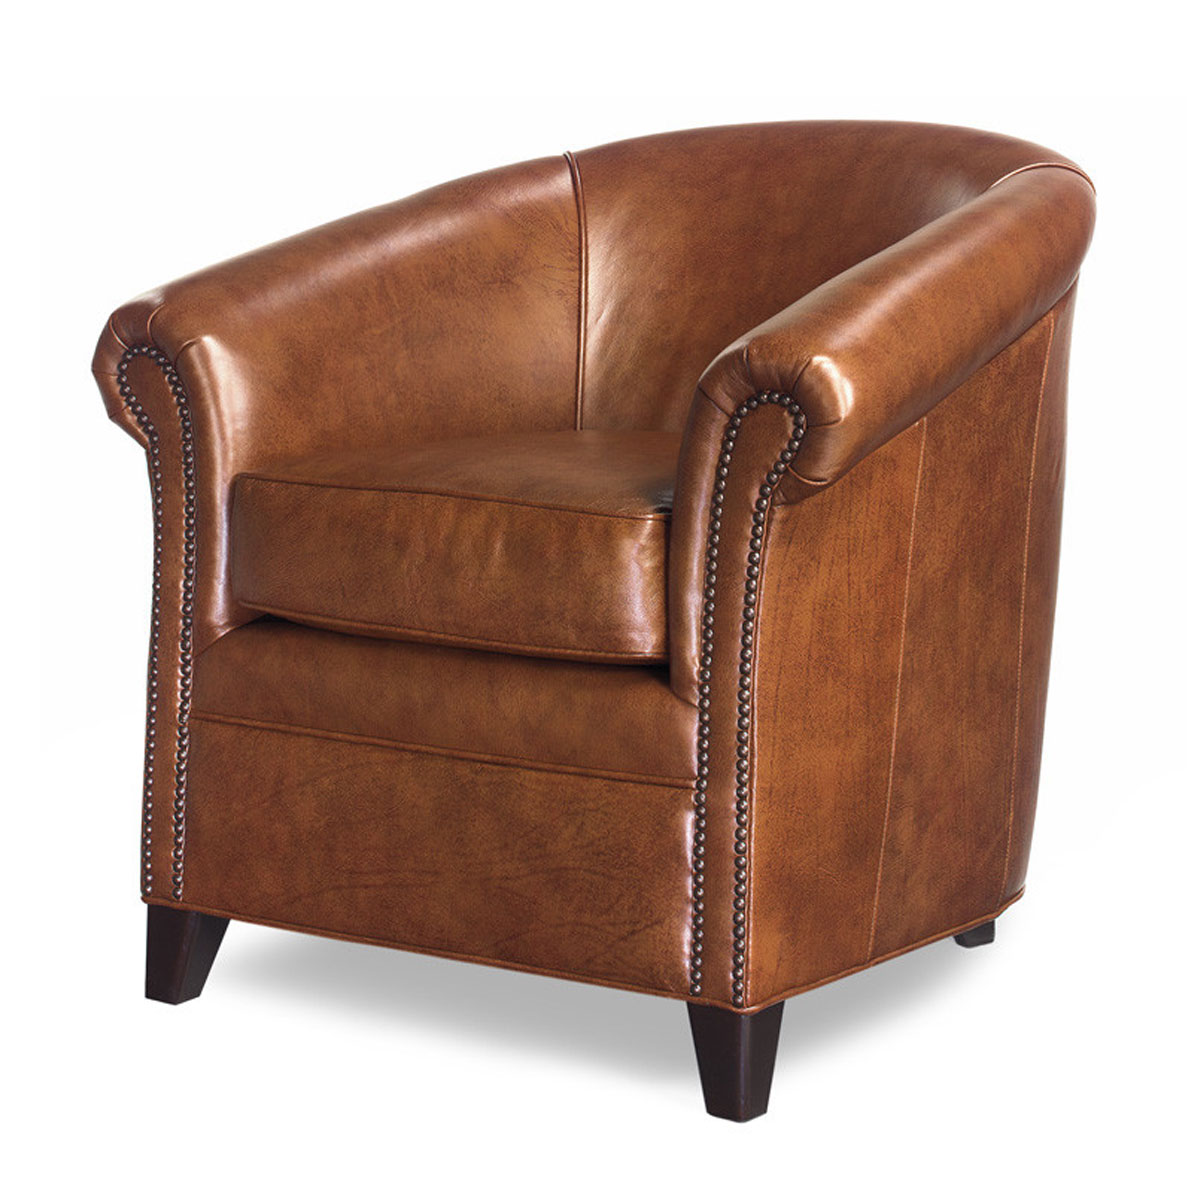 Marshall 234 Barrel Chair  by McKinley Leather